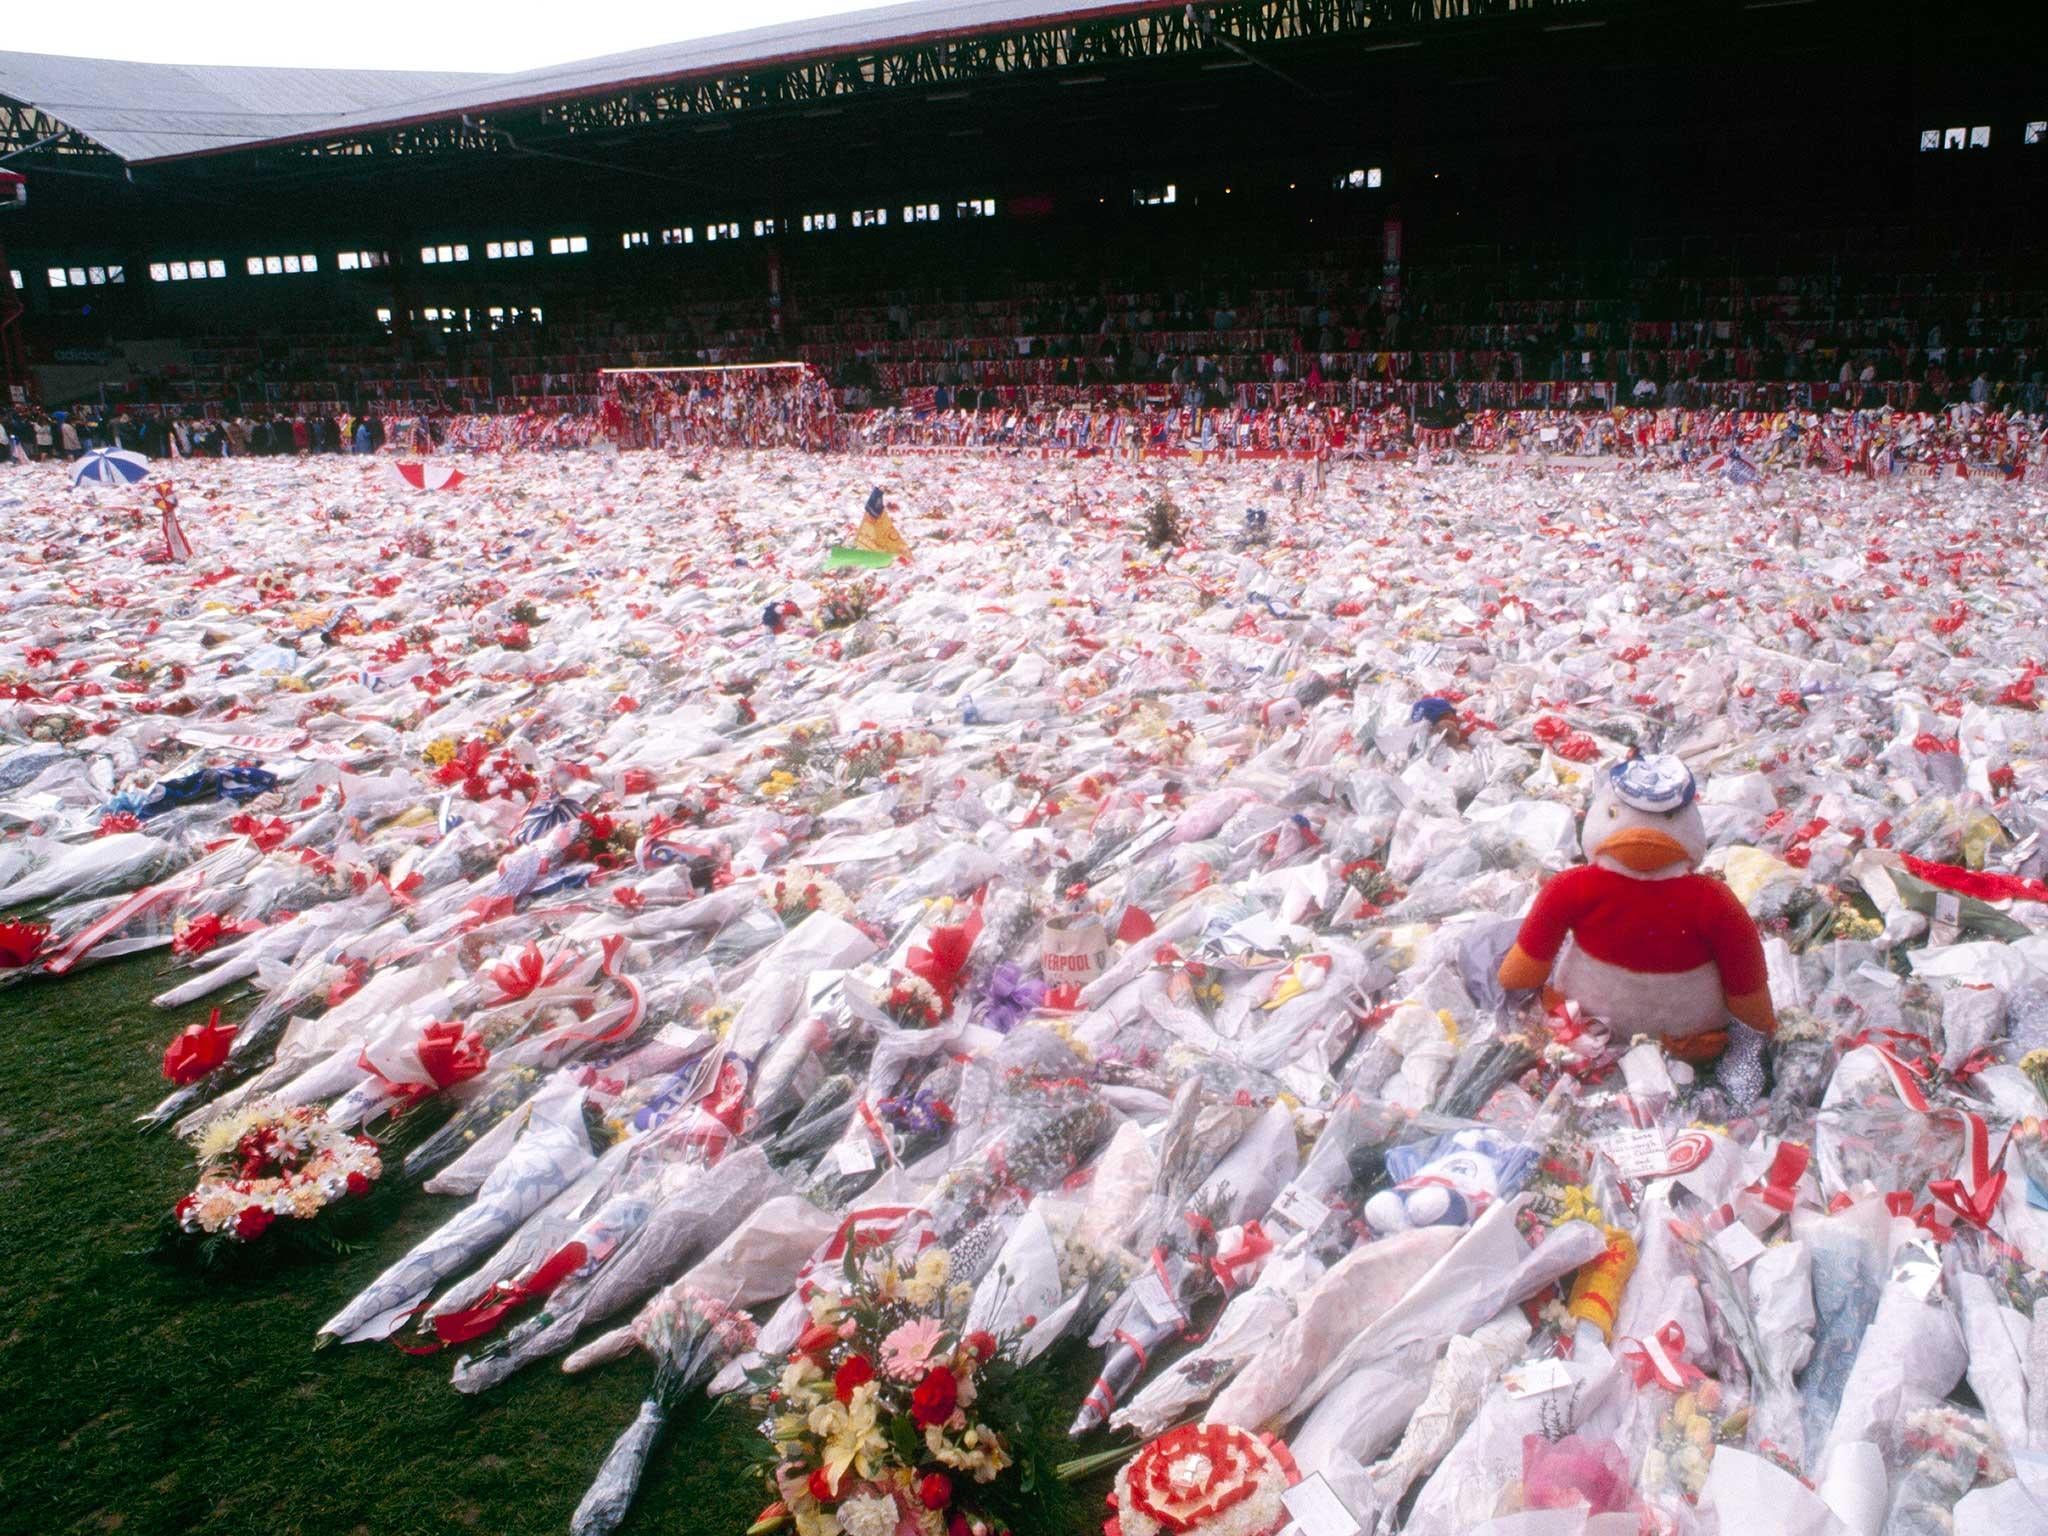 Jurors at the inquest have concluded the 96 Hillsborough victims were unlawfully killed